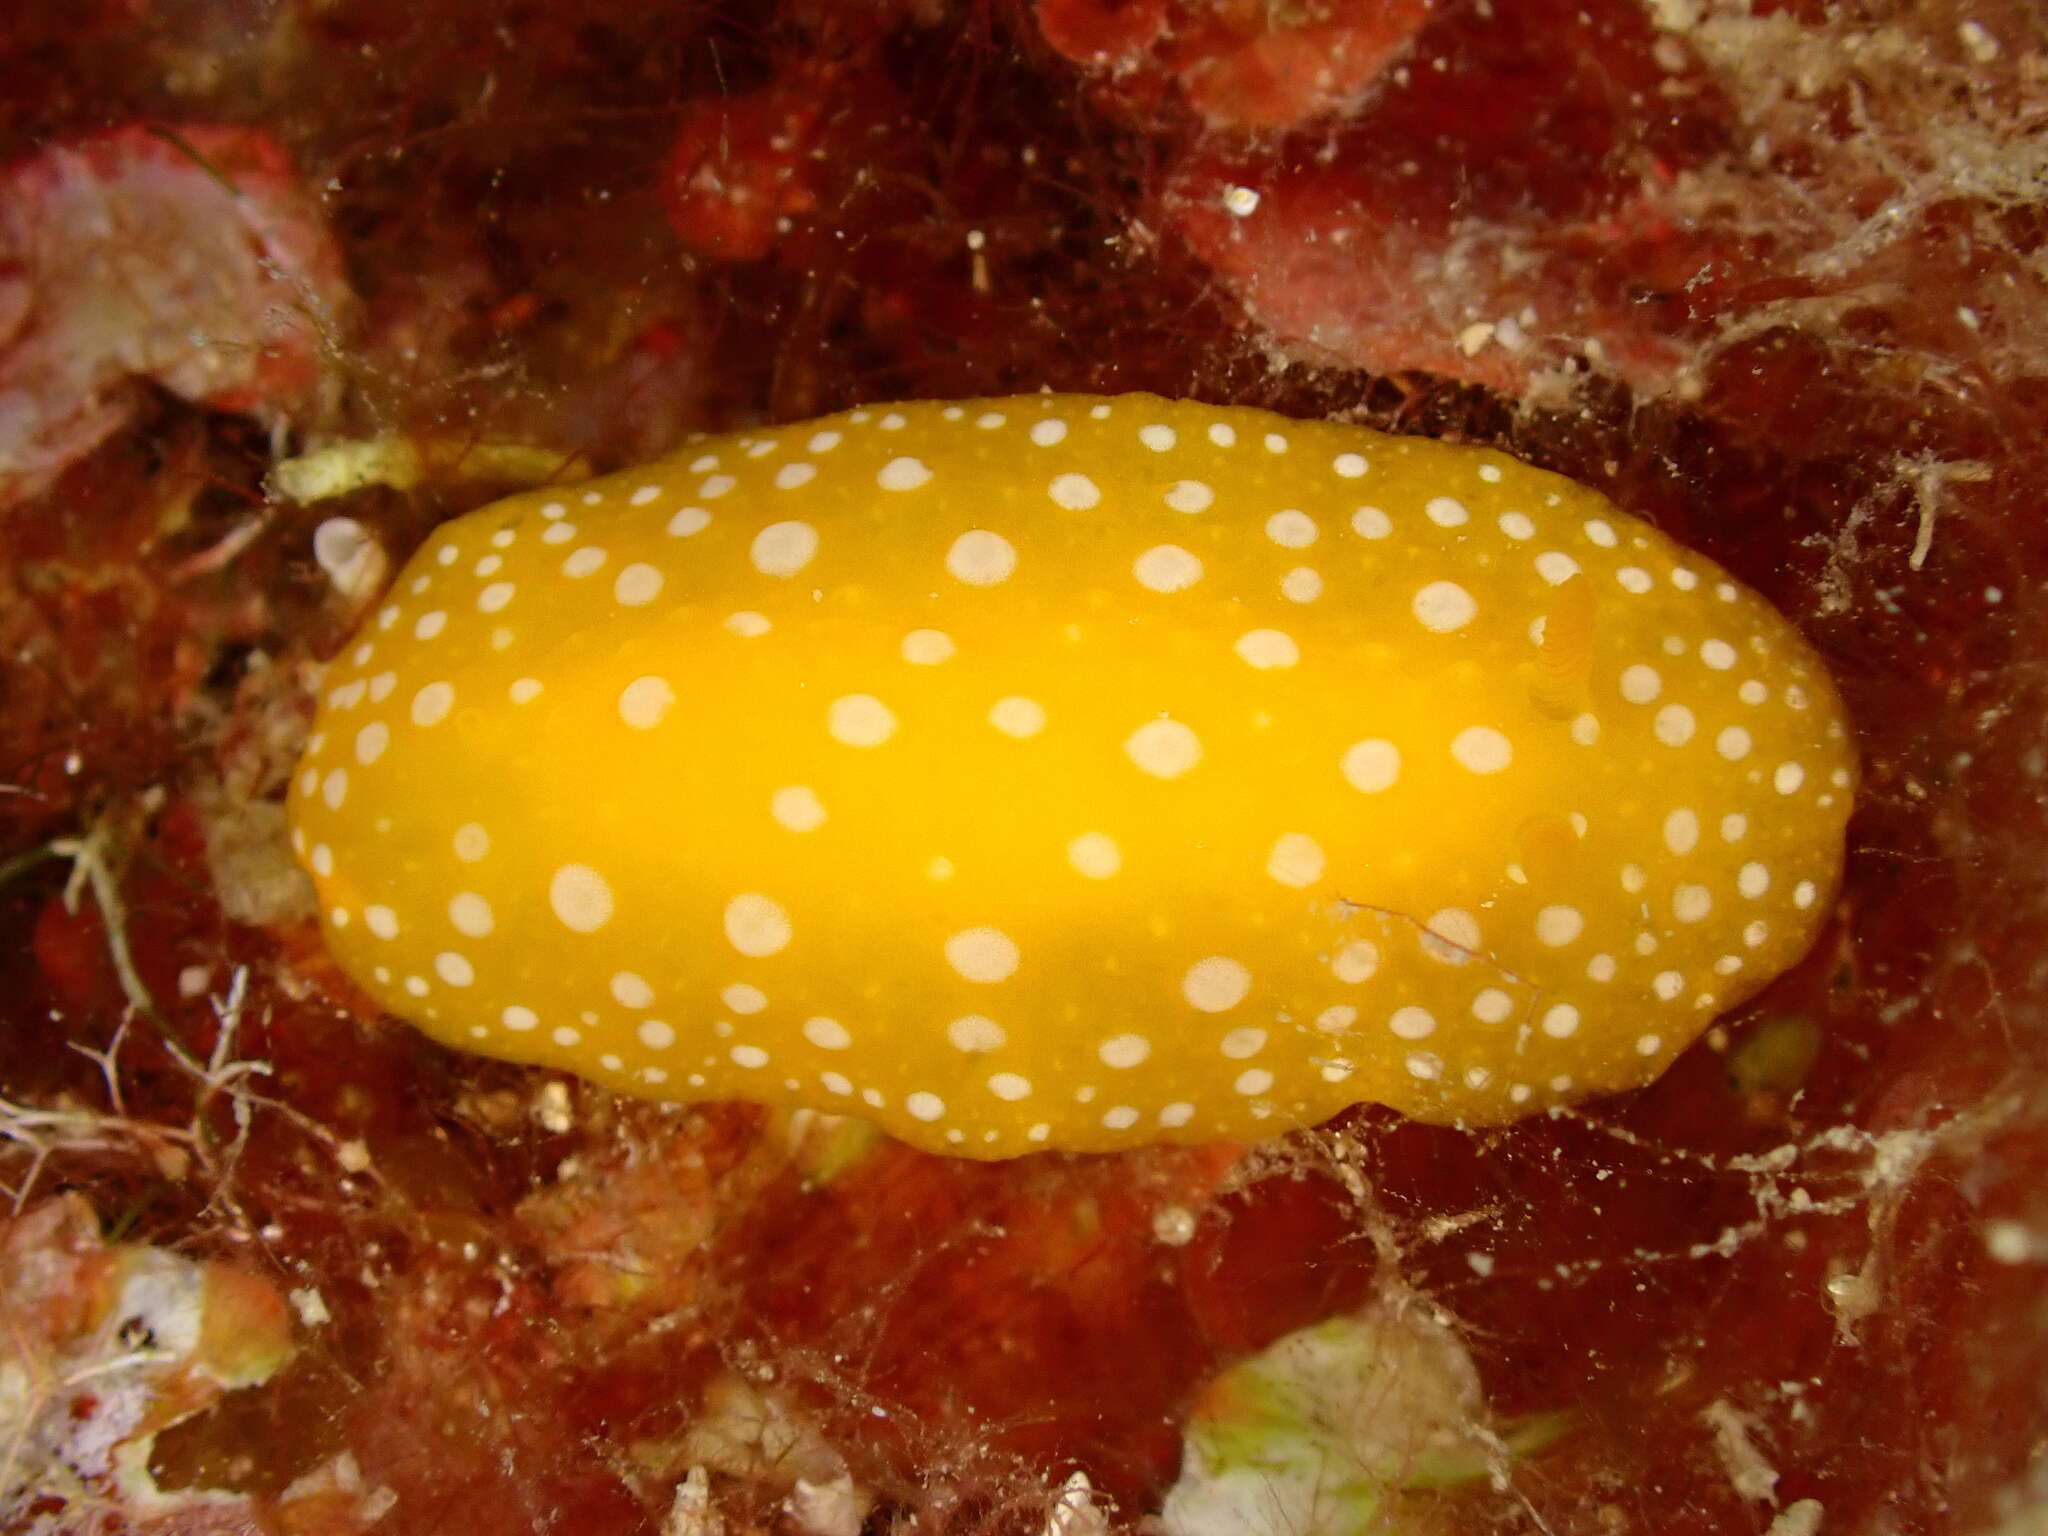 Image of white-spotted yellow nudibranch